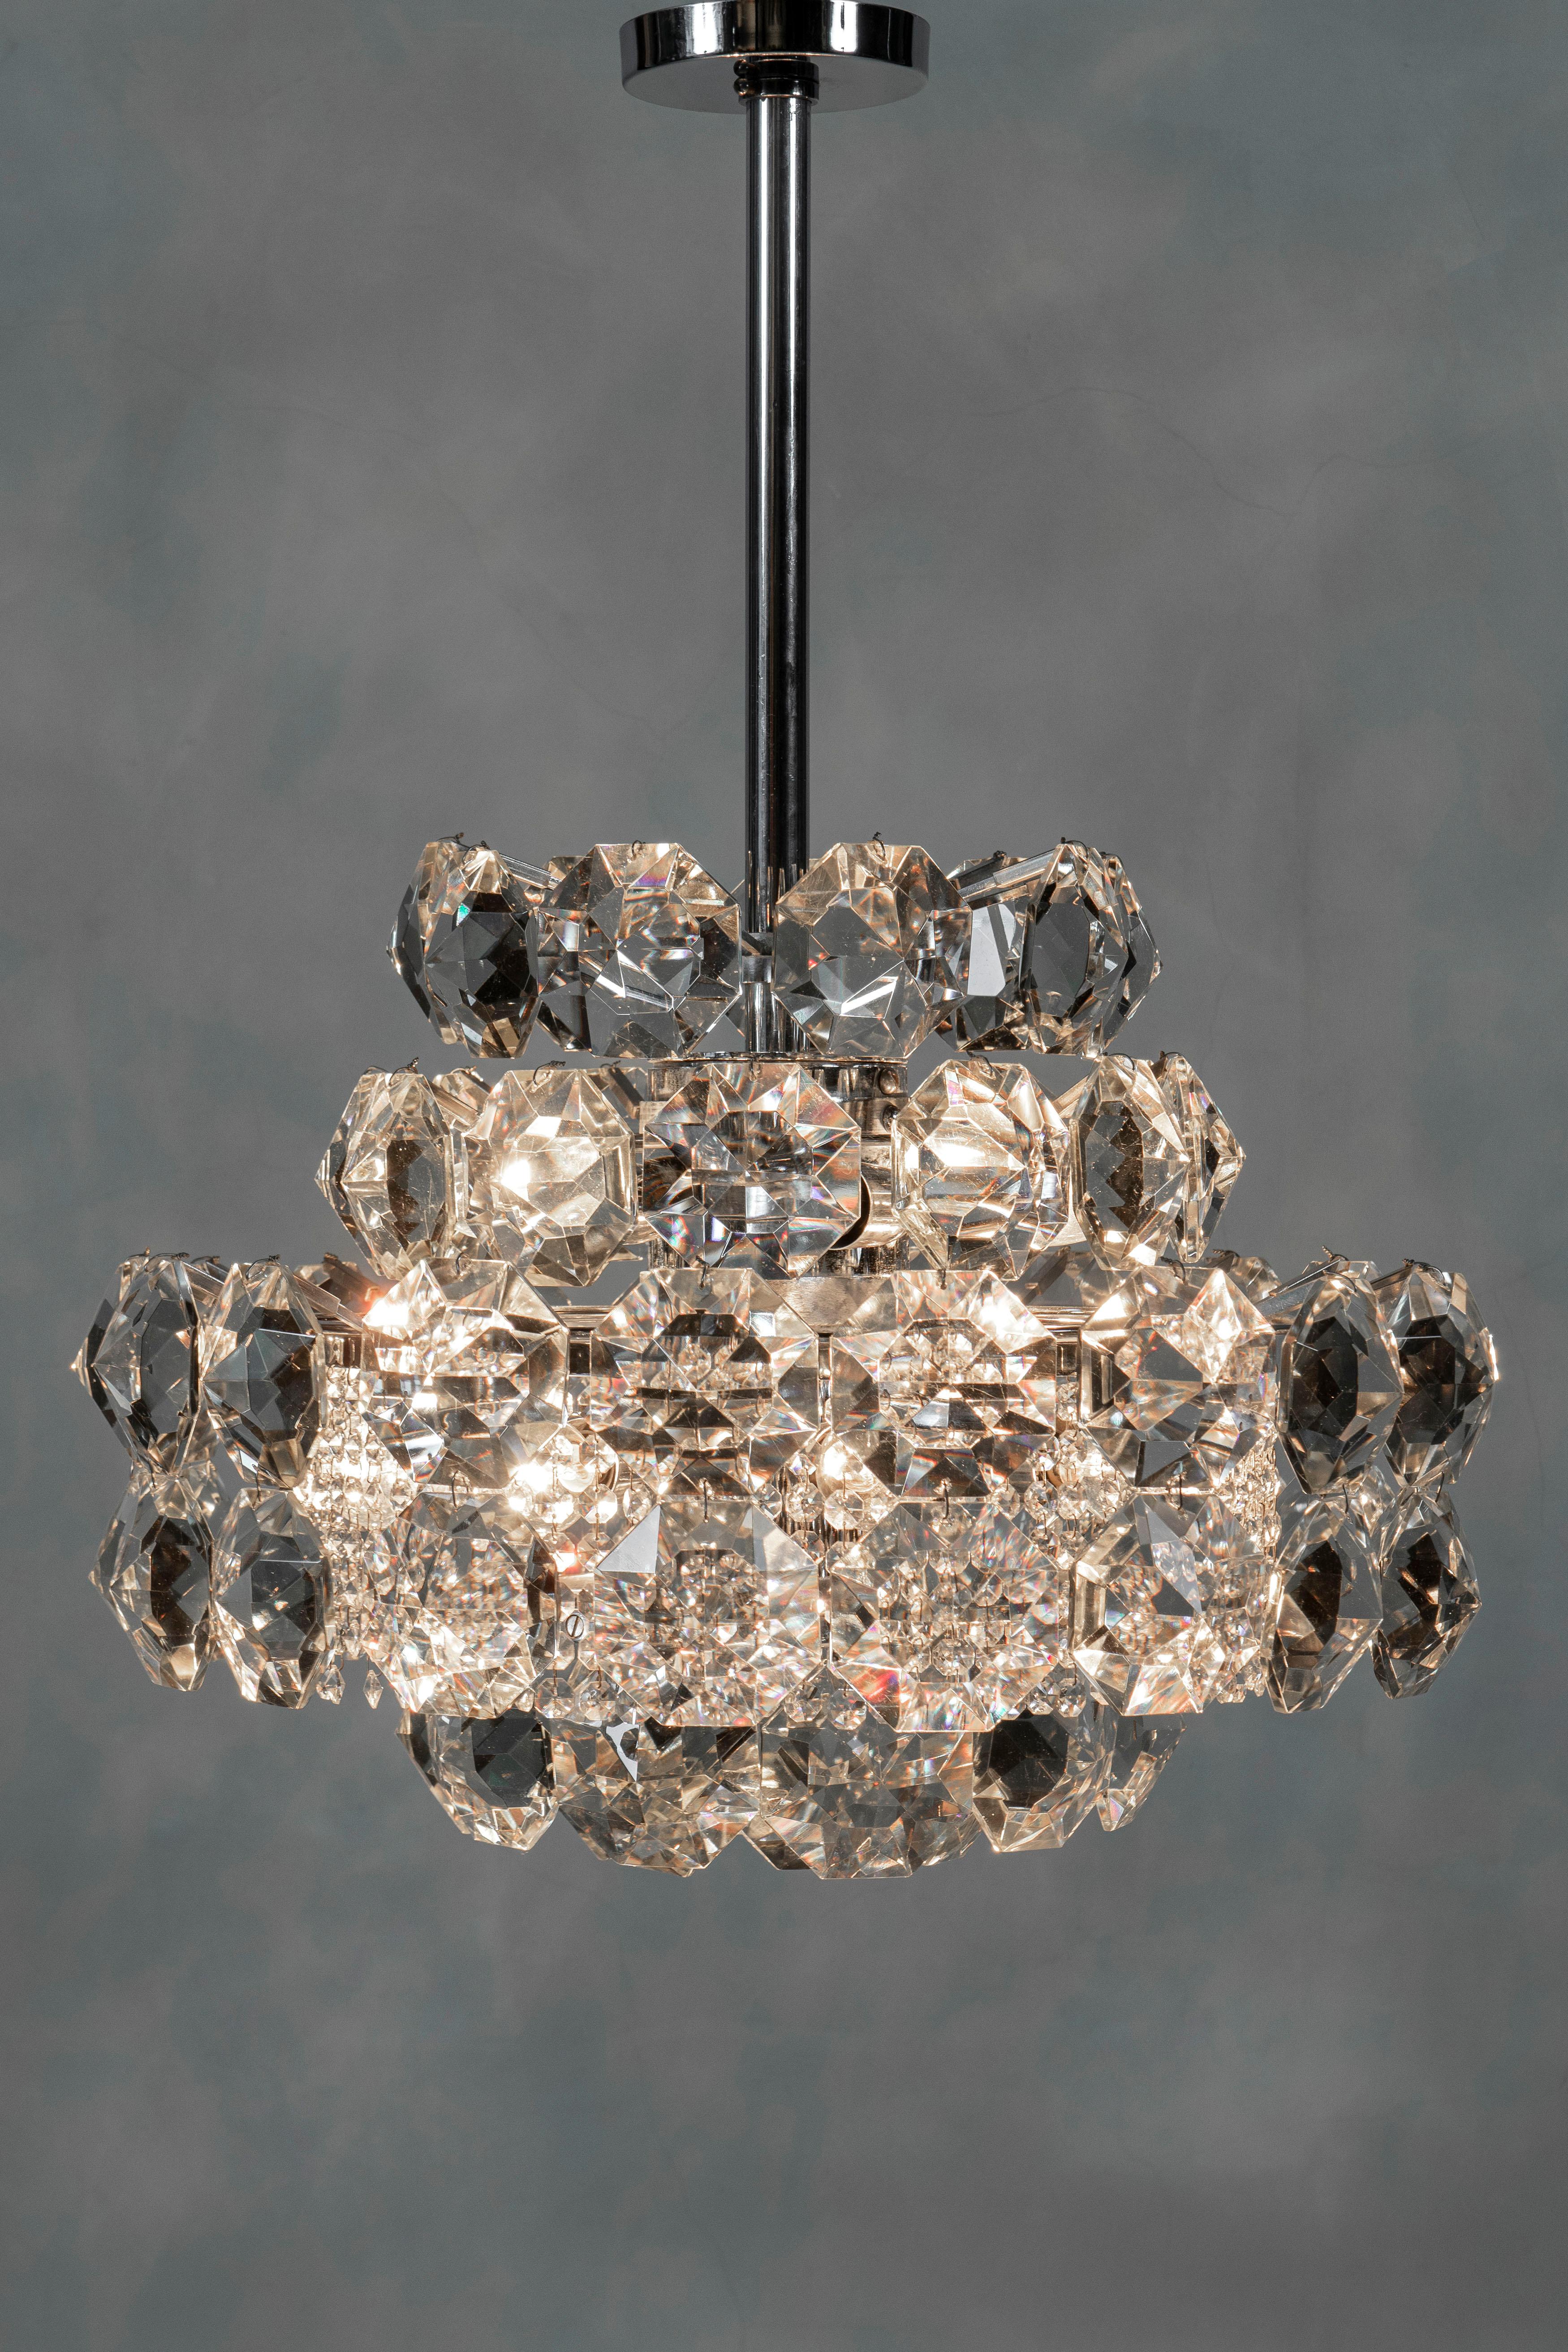 Pair of Chrome metal and crystal glass chandeliers attributed to Bakalowits & Söhne, circa 1960.